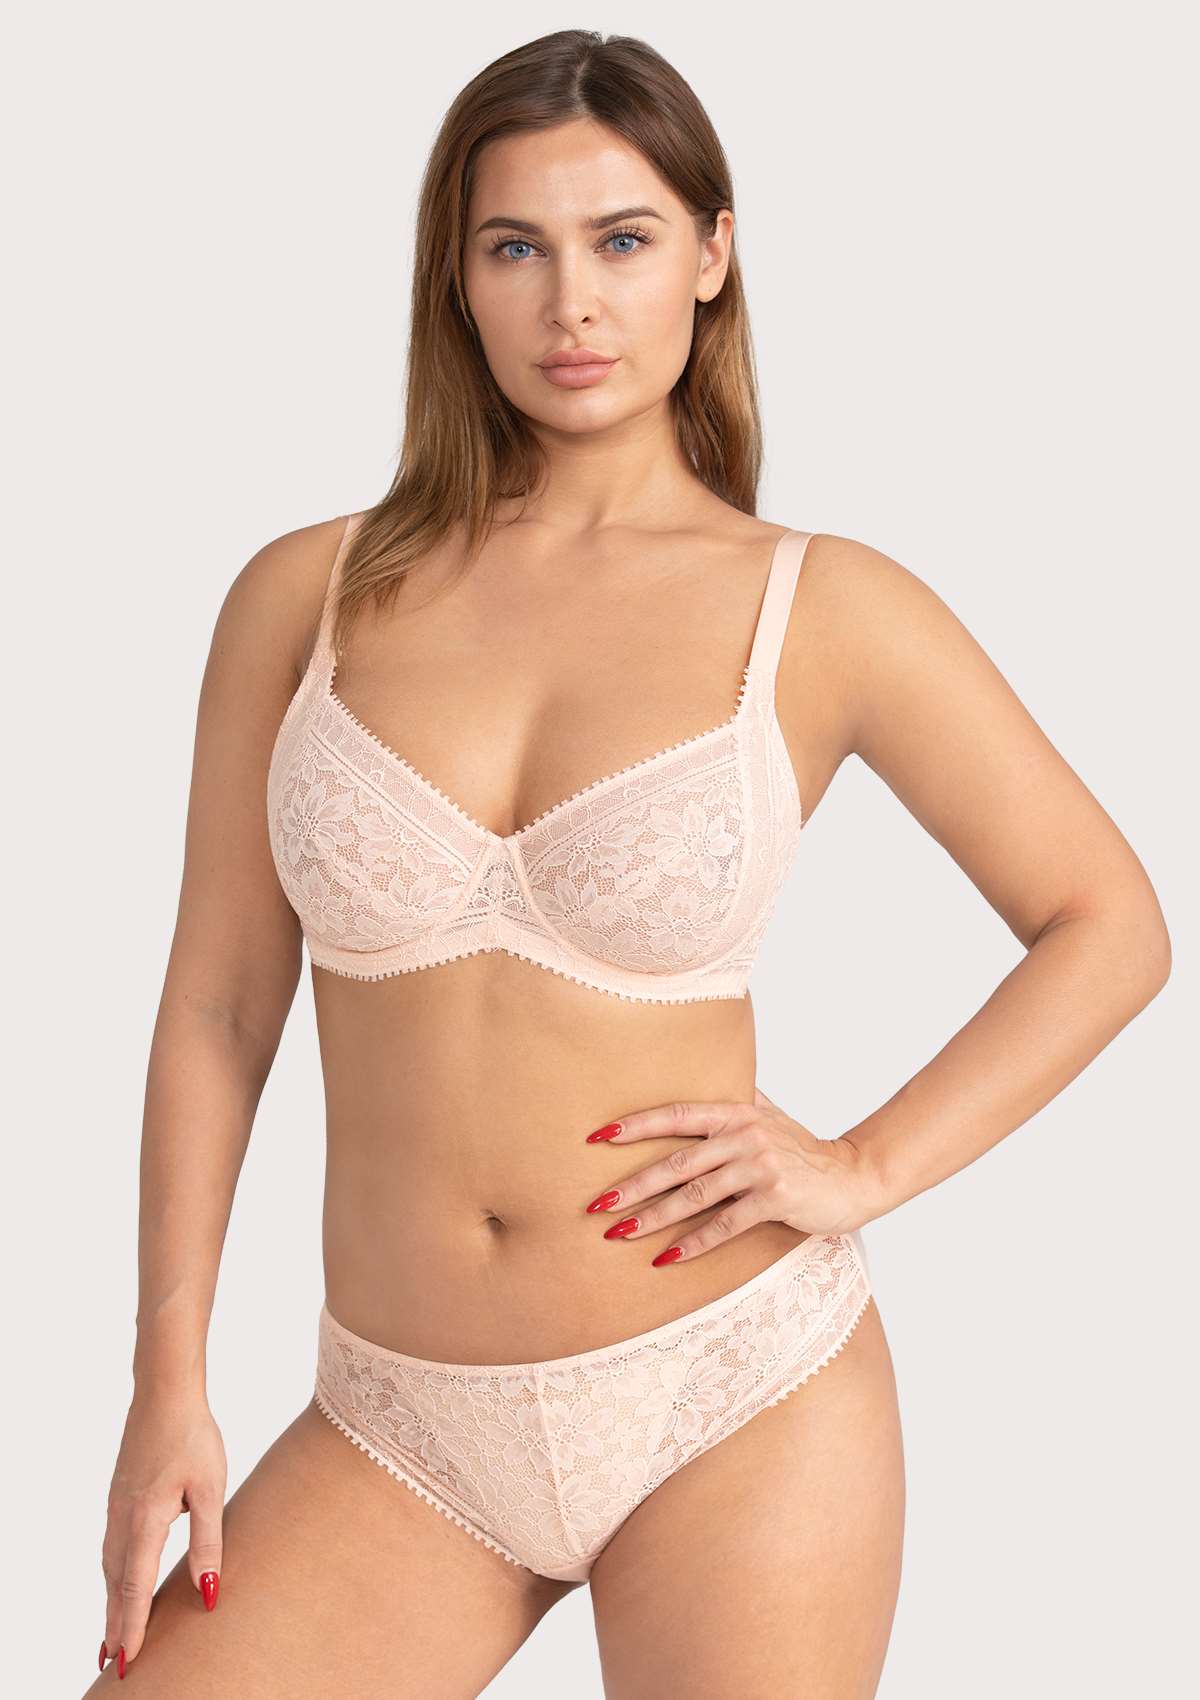 HSIA Silene Floral Delicate Unlined Lace Soft Cup Uplift Bra - Champagne / 42 / DD/E